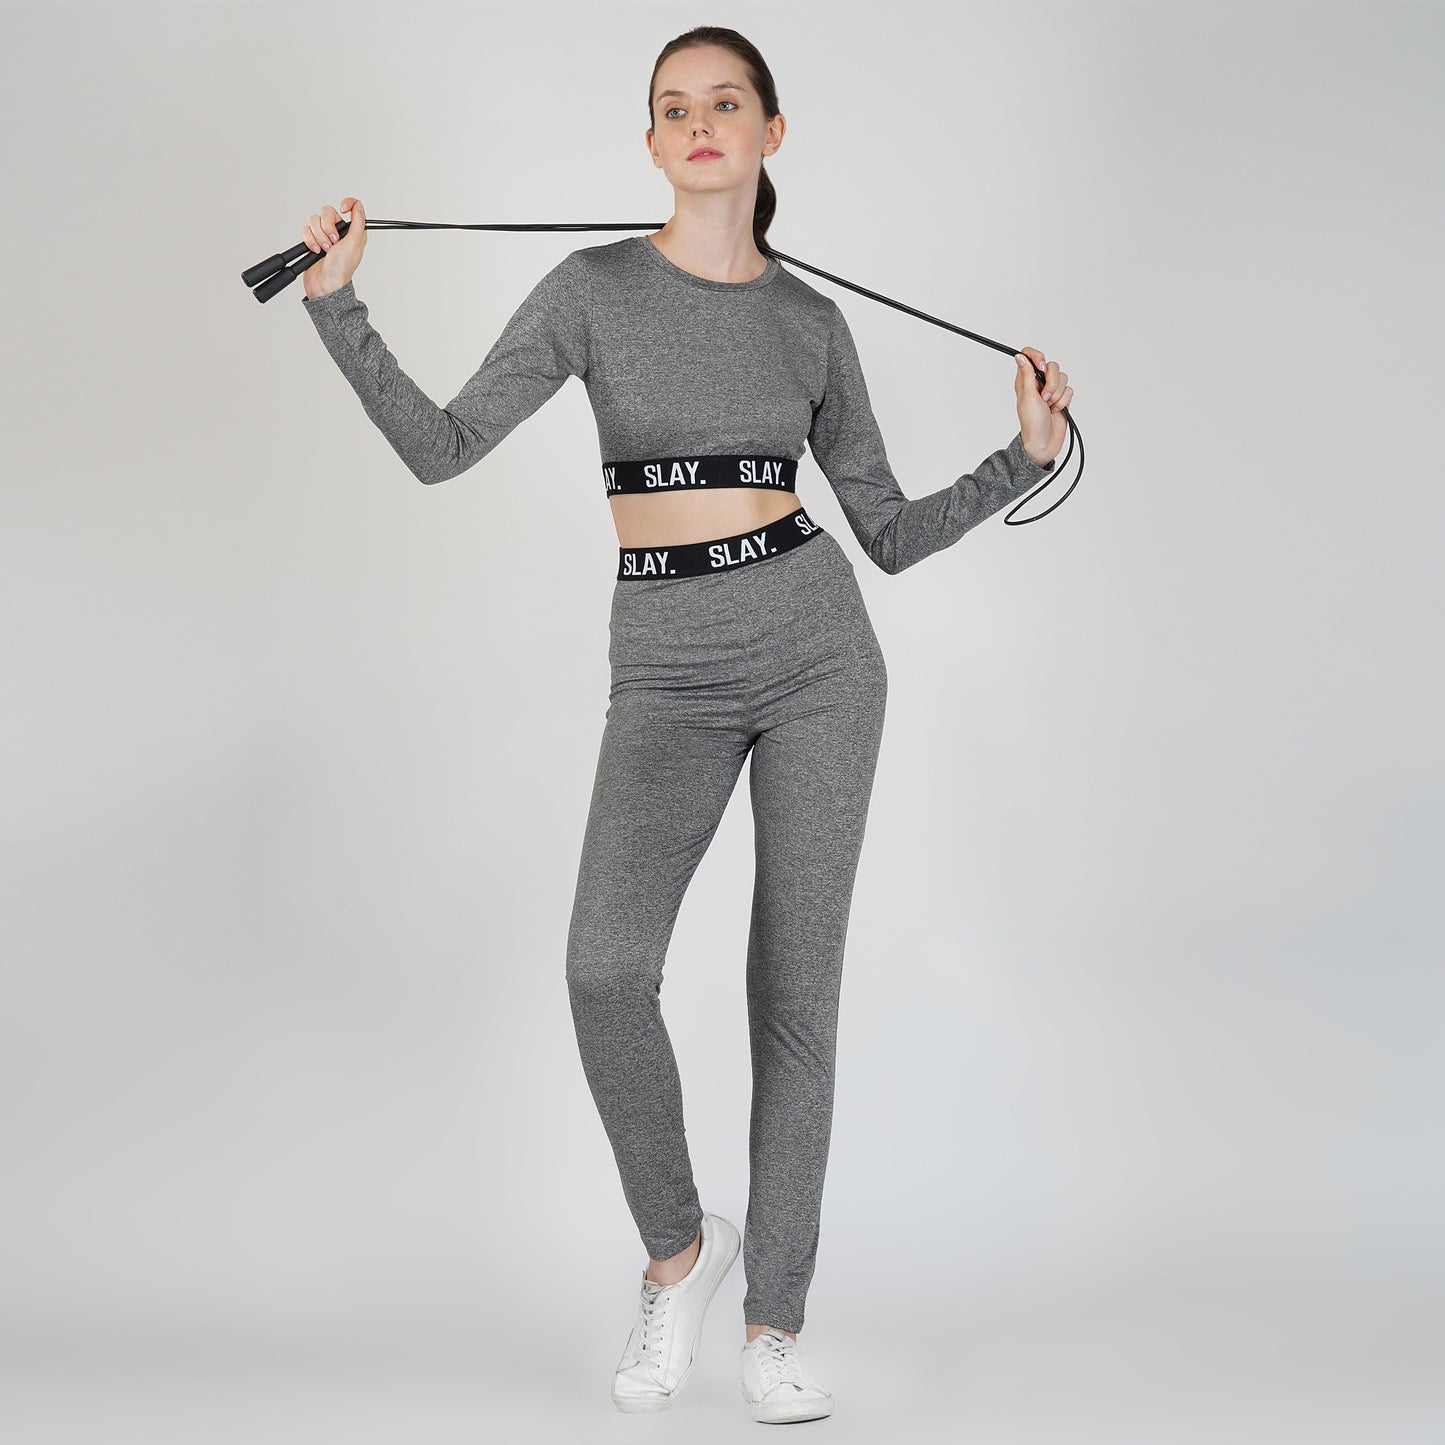 SLAY. Sport Women's Activewear Full Sleeves Crop Top And Pants Co ord Set  Women's activewear co-ord sets Gym co-ord sets for ladies Matching